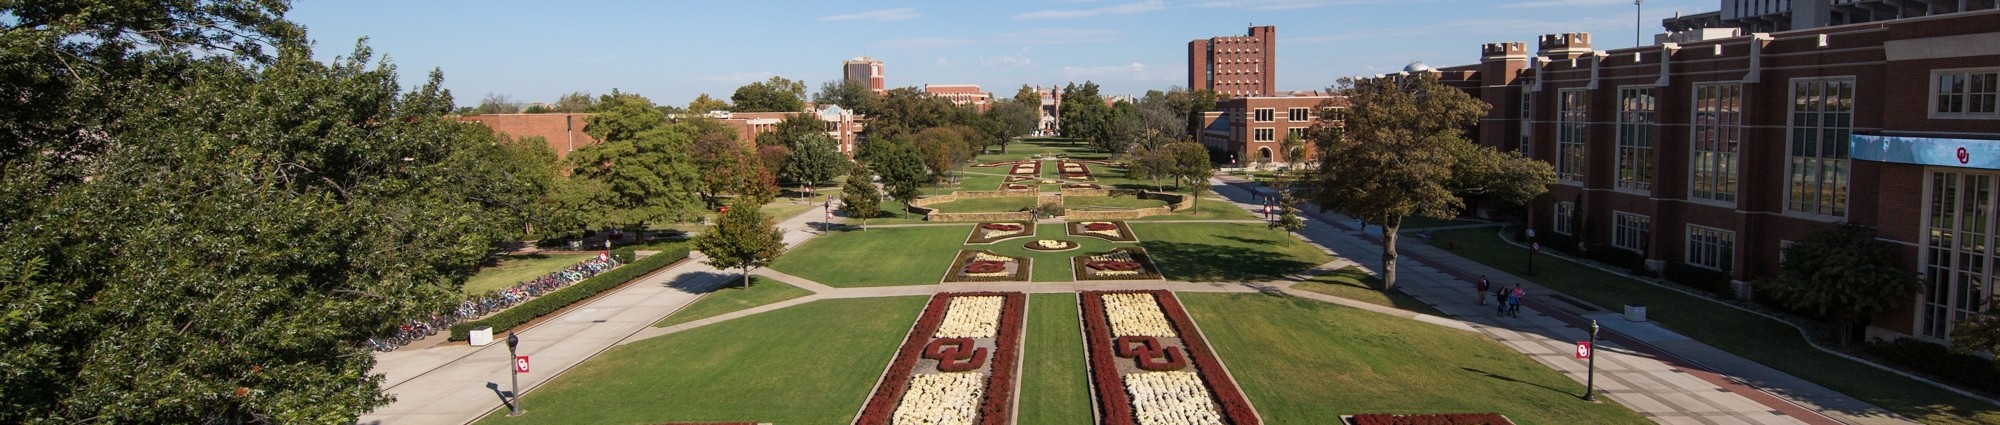 The South Oval on the University of Oklahoma campus in Norman